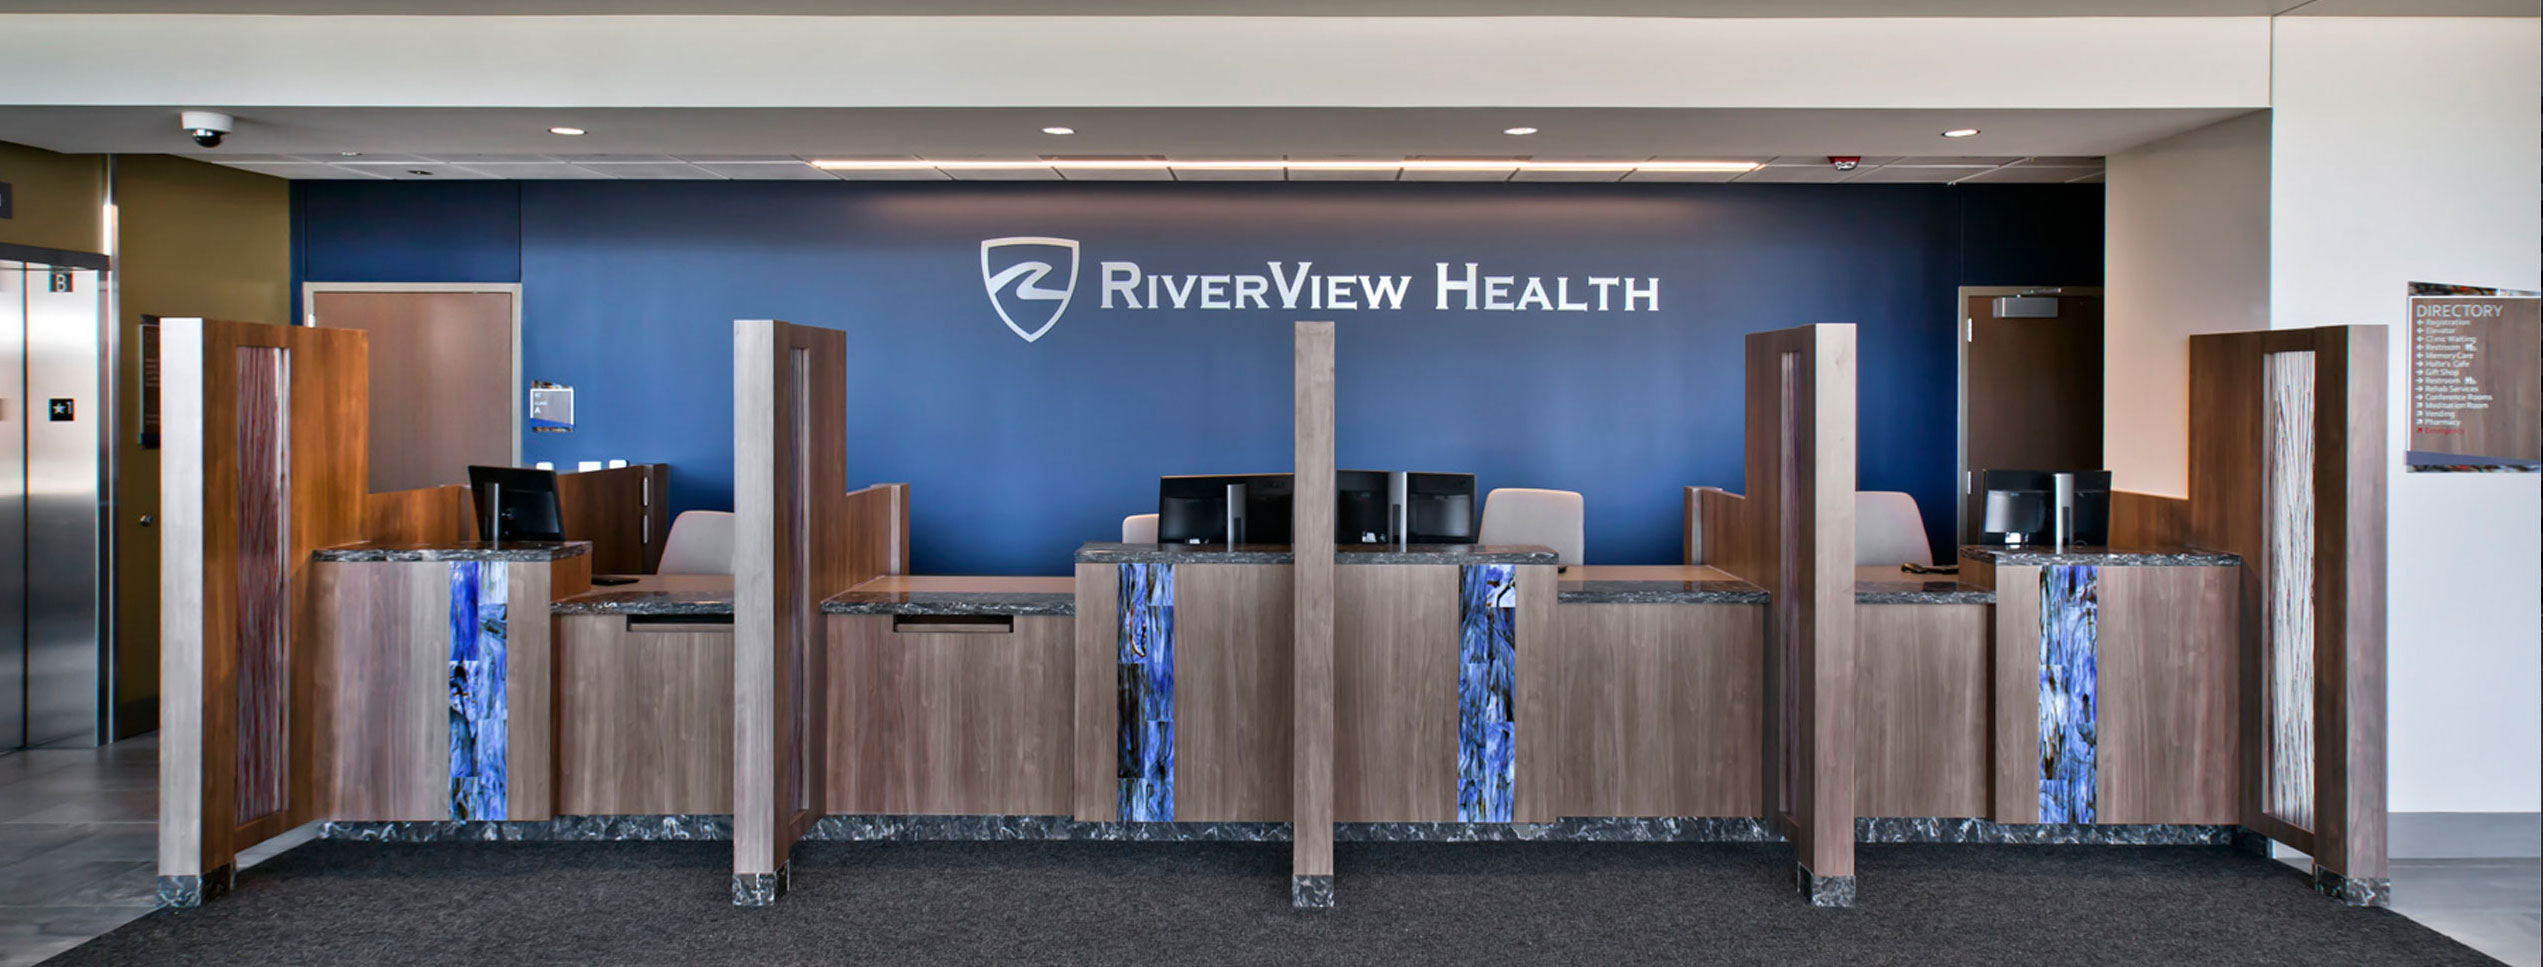 River View Health Expansion and Renovation reception and check in area